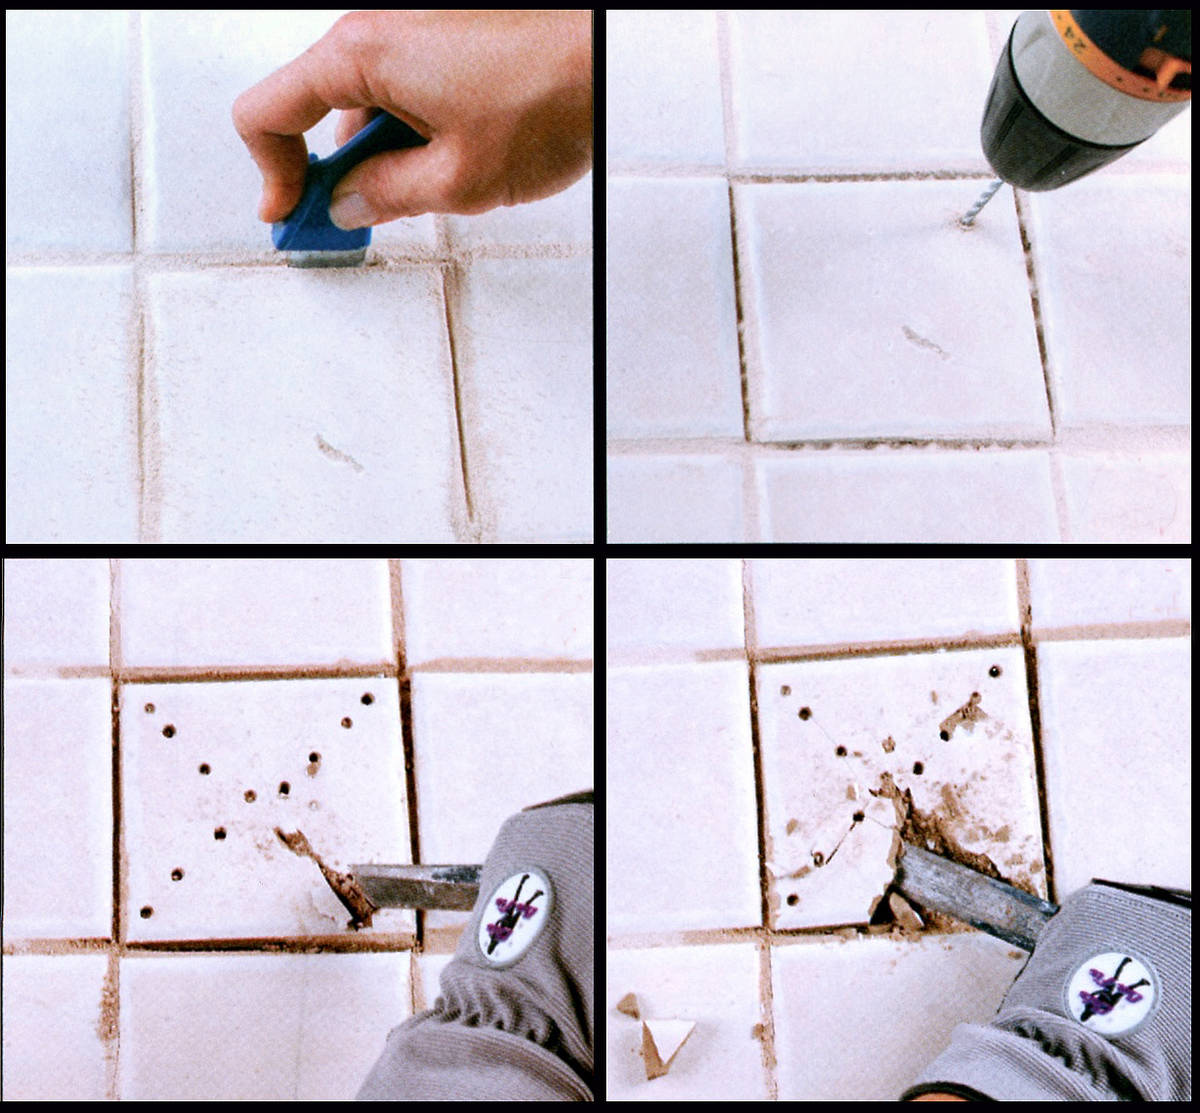 (Norma Vally) To break out old tiles, first remove the grout. Then, make small divots in the sh ...